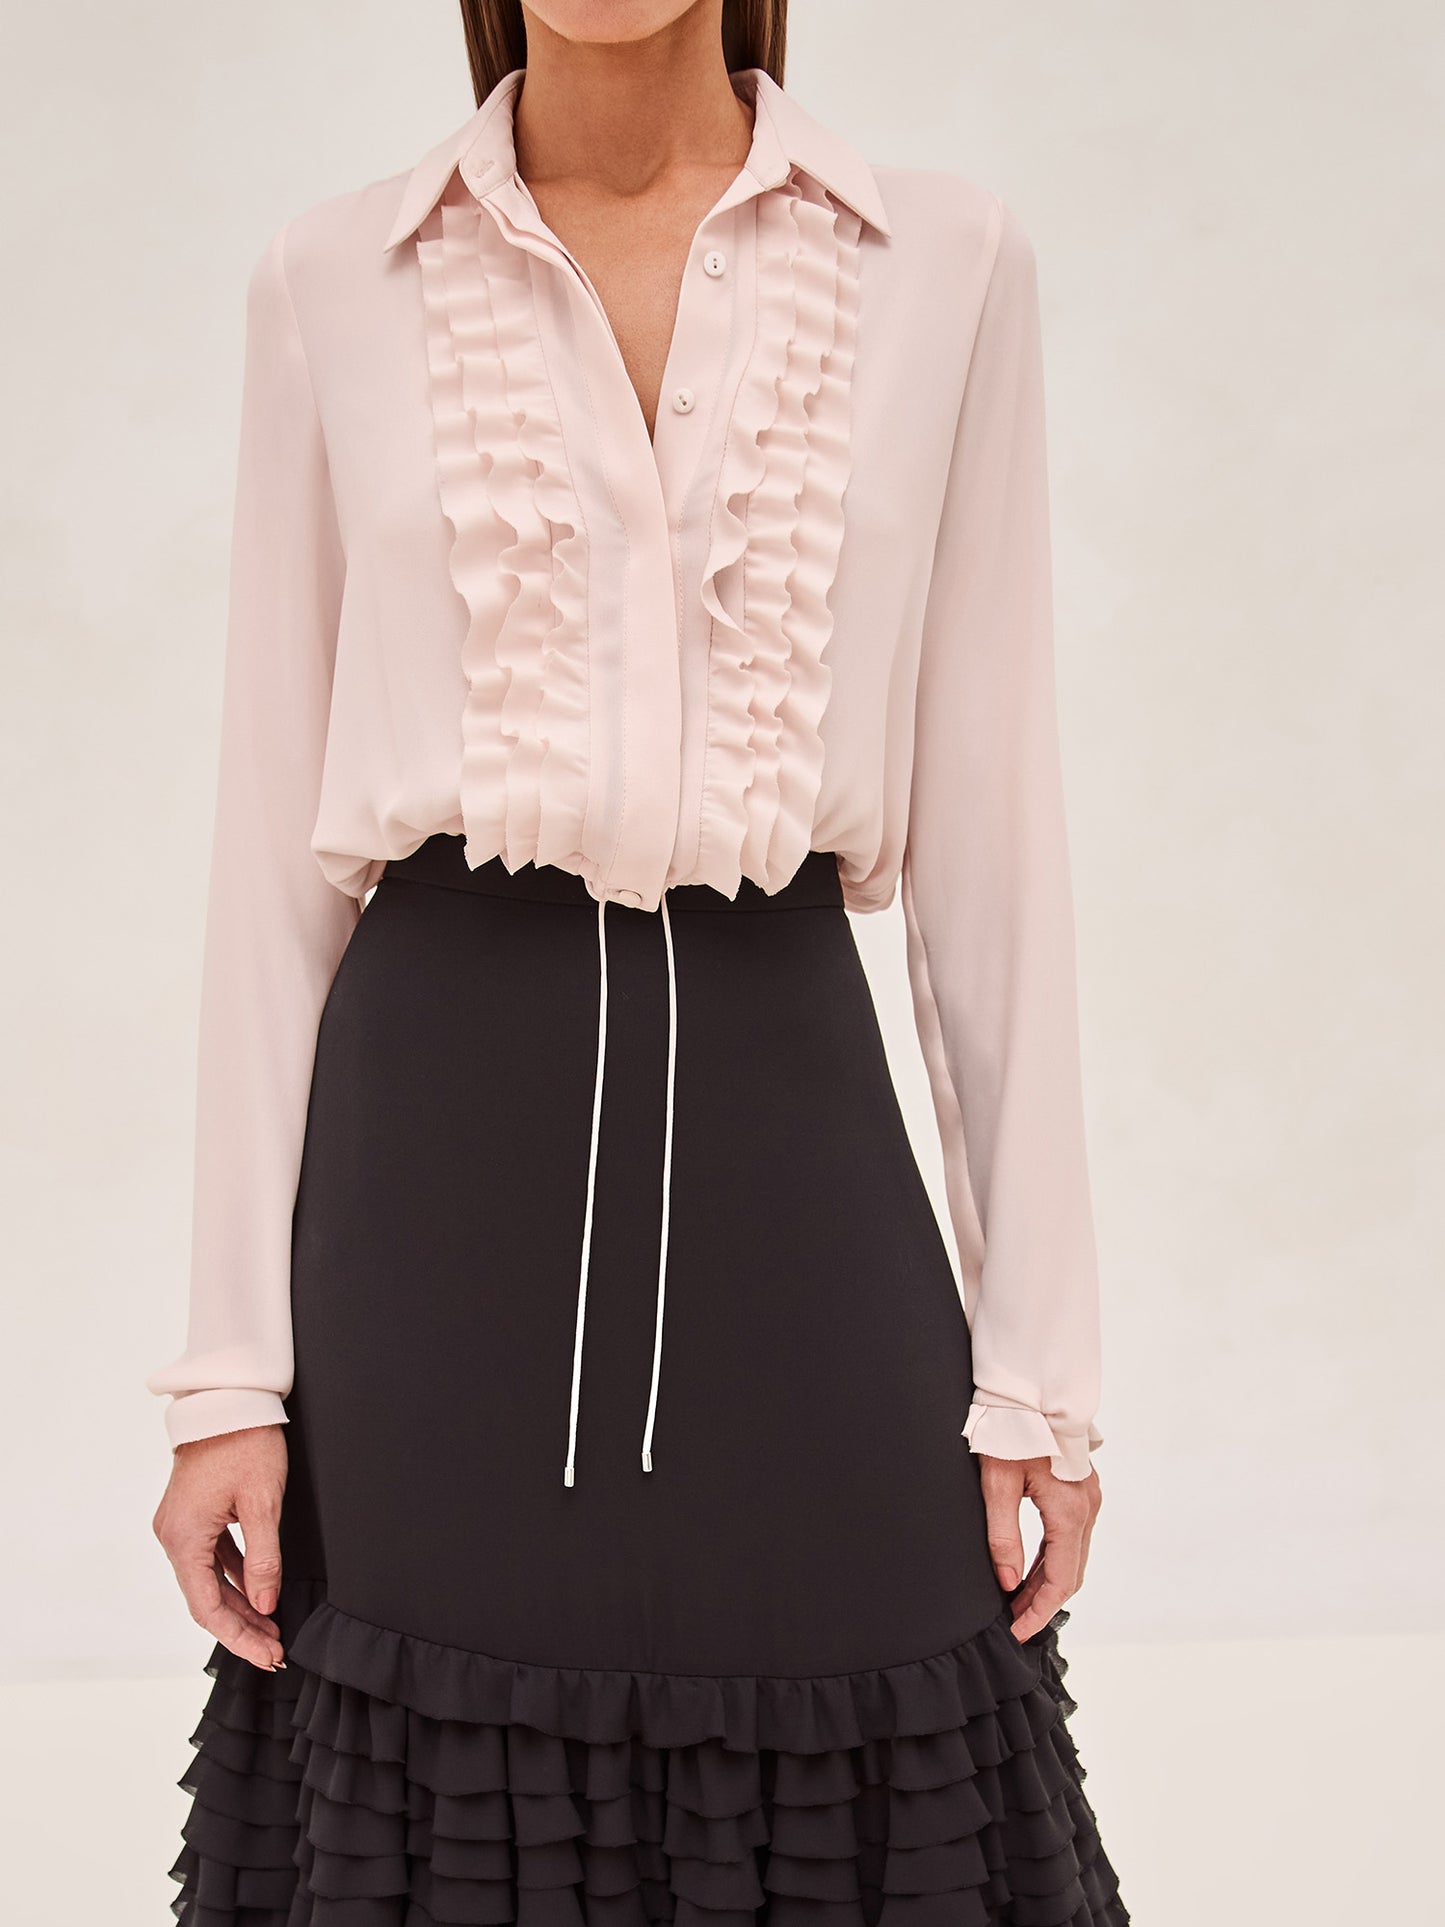 ALEXIS black midi skirt with ruffle tier detailing and a blush tier at the bottom. 